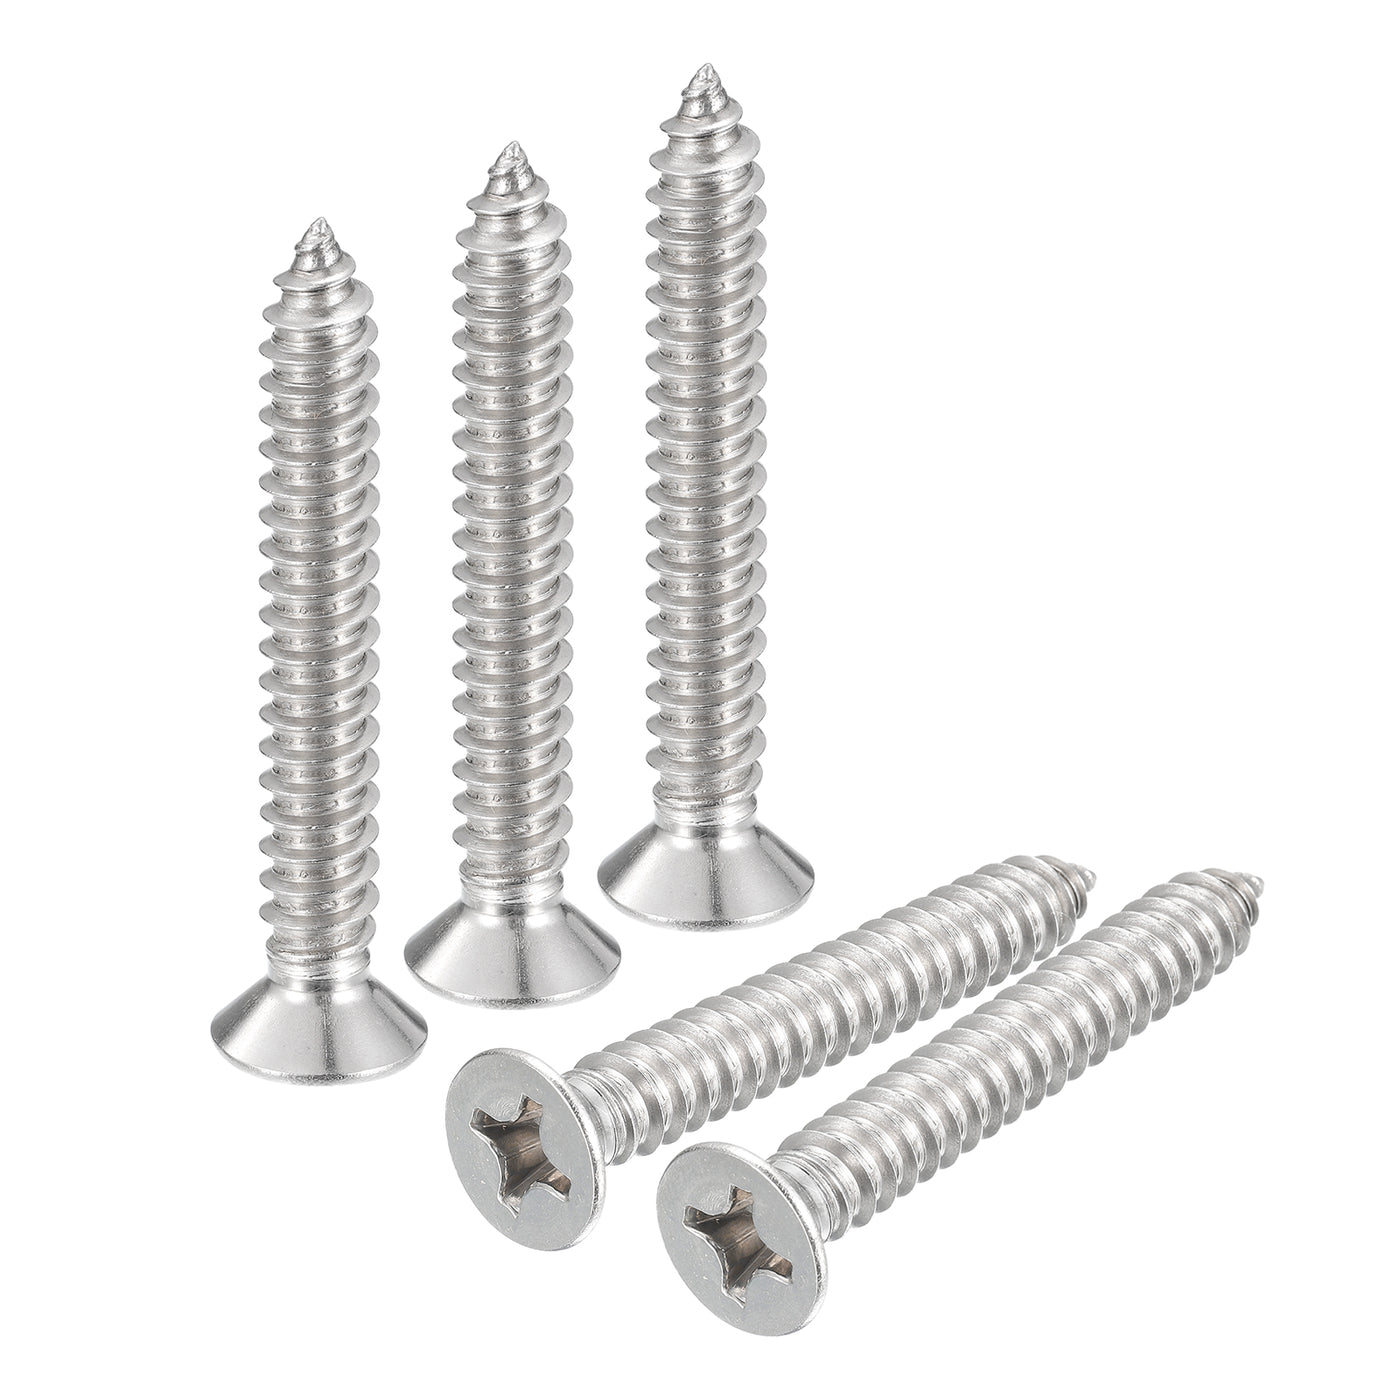 uxcell Uxcell #14x1-3/4" Wood Screws, 15pcs Phillips Self Tapping Screws 304 Stainless Steel